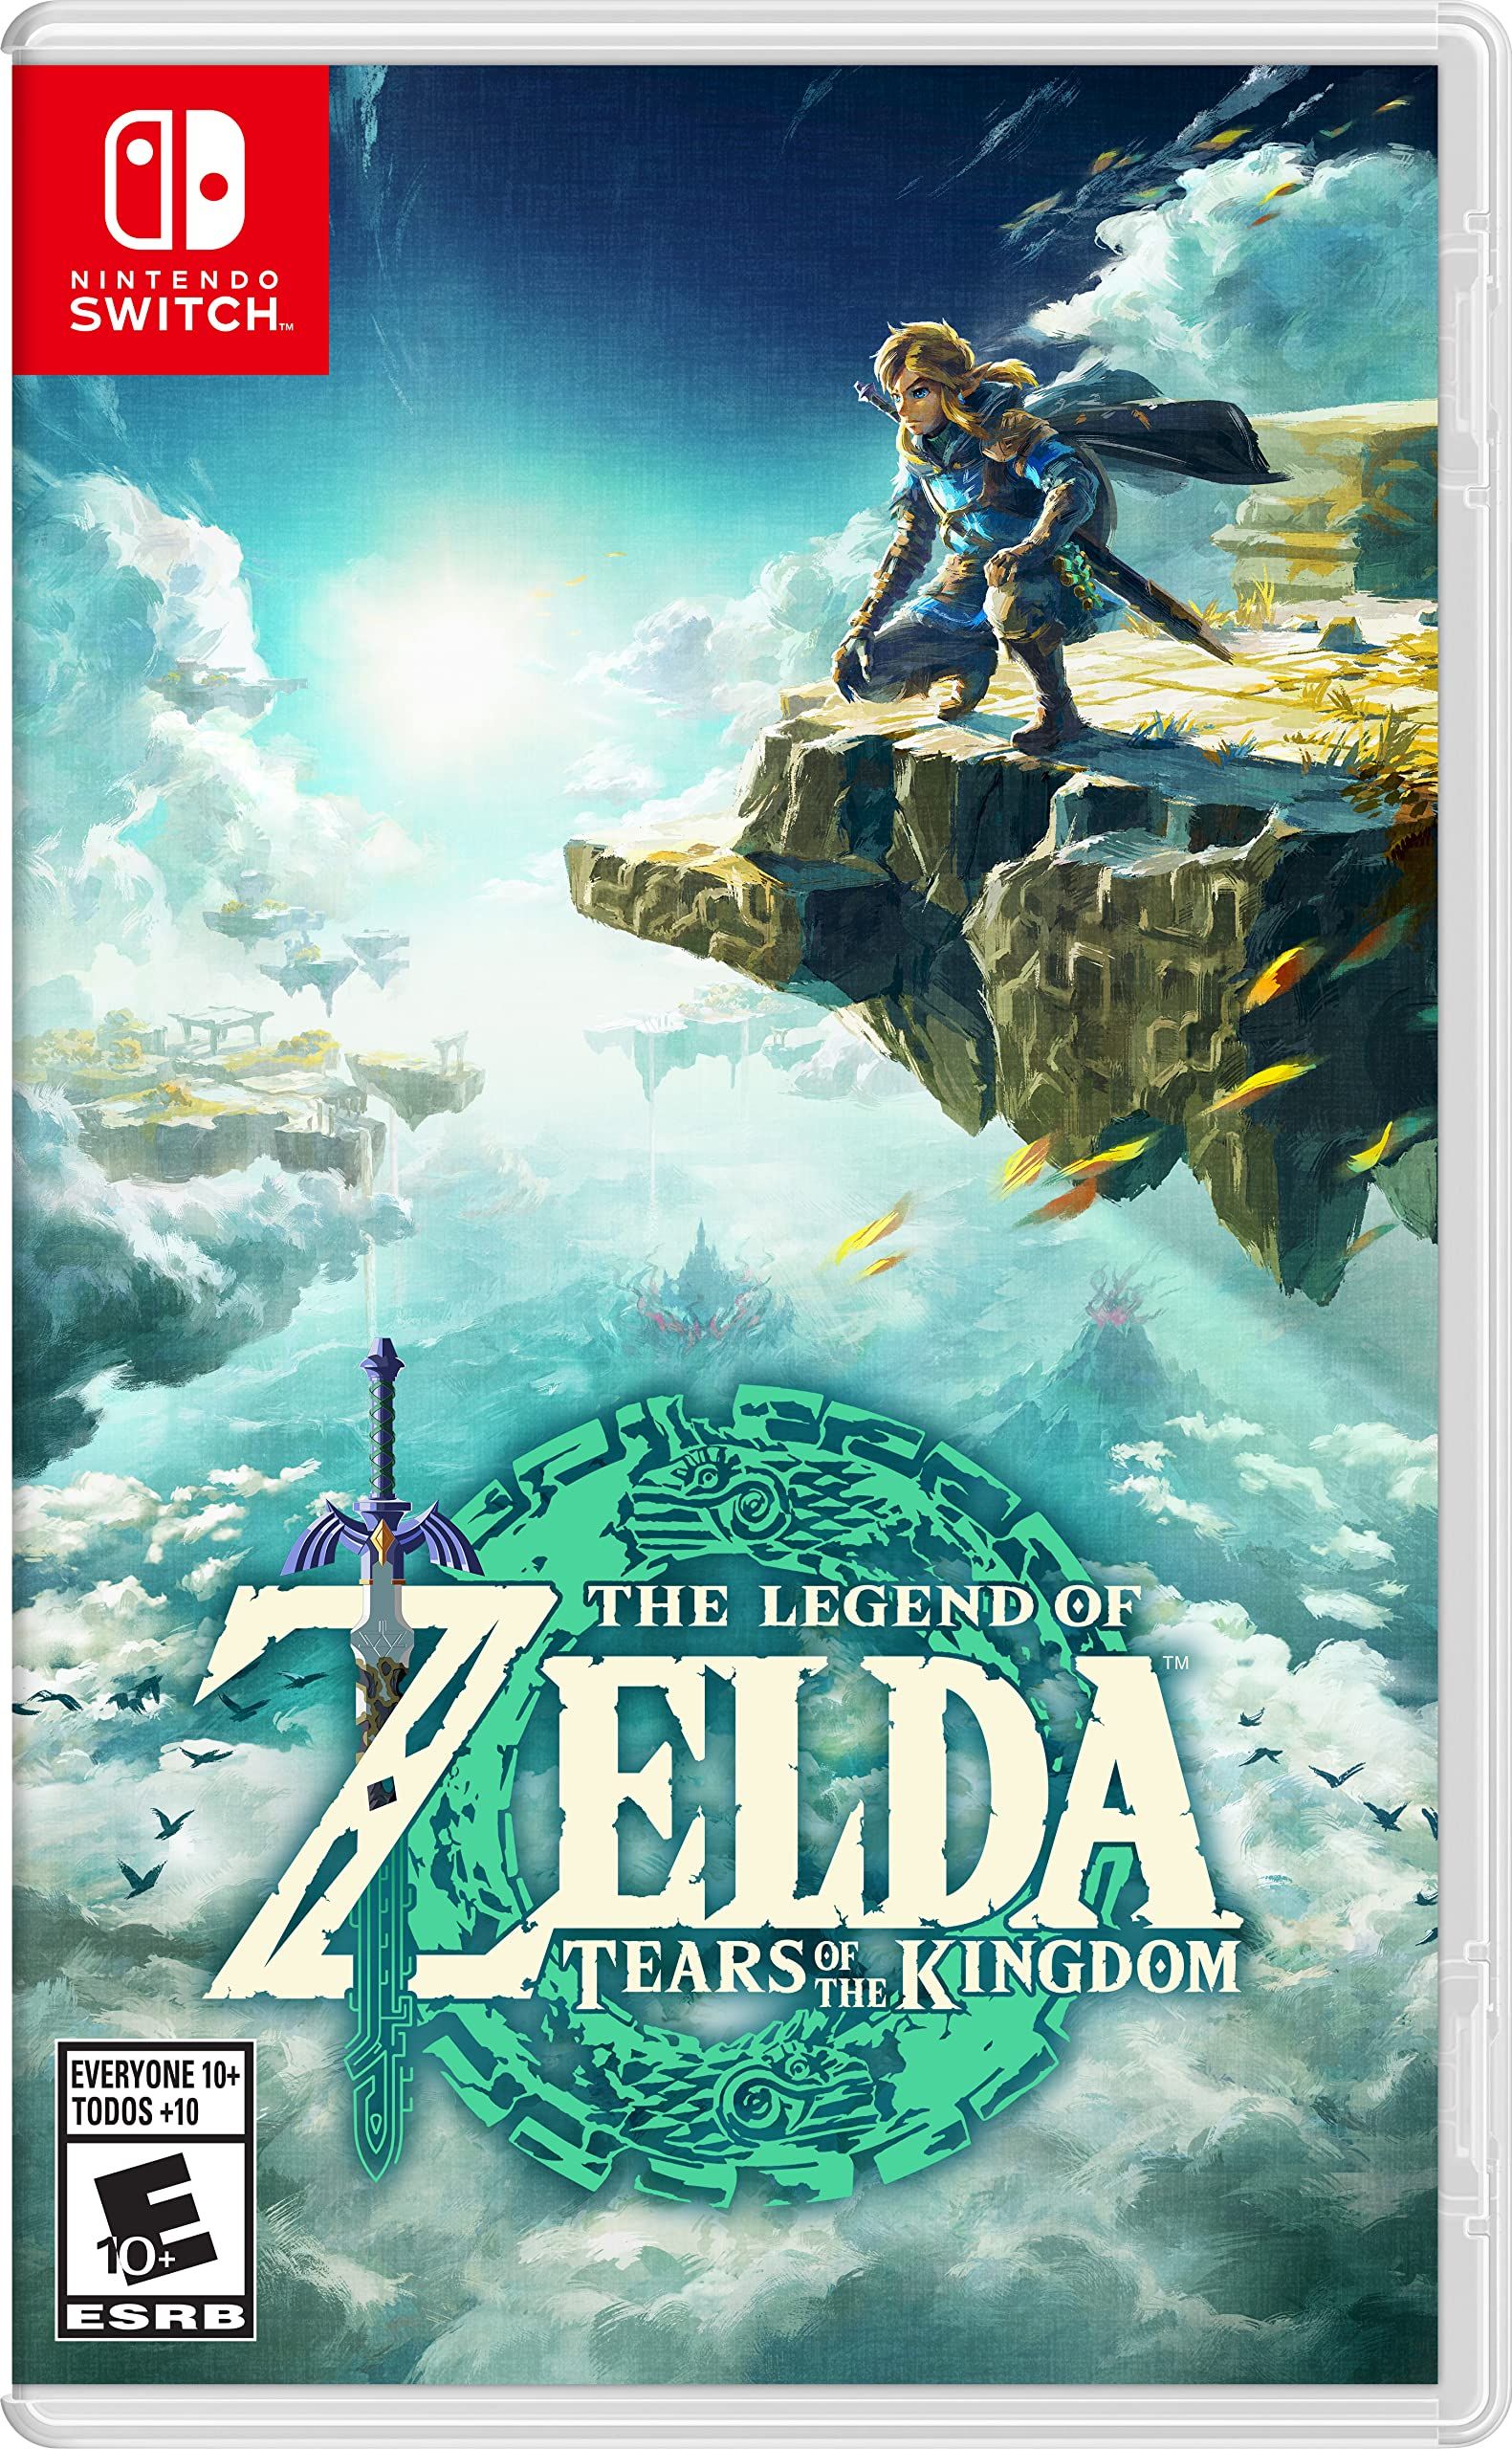 US: Zelda Breath Of The Wild Deluxe Edition Game Guide Now 40% Cheaper On   - My Nintendo News